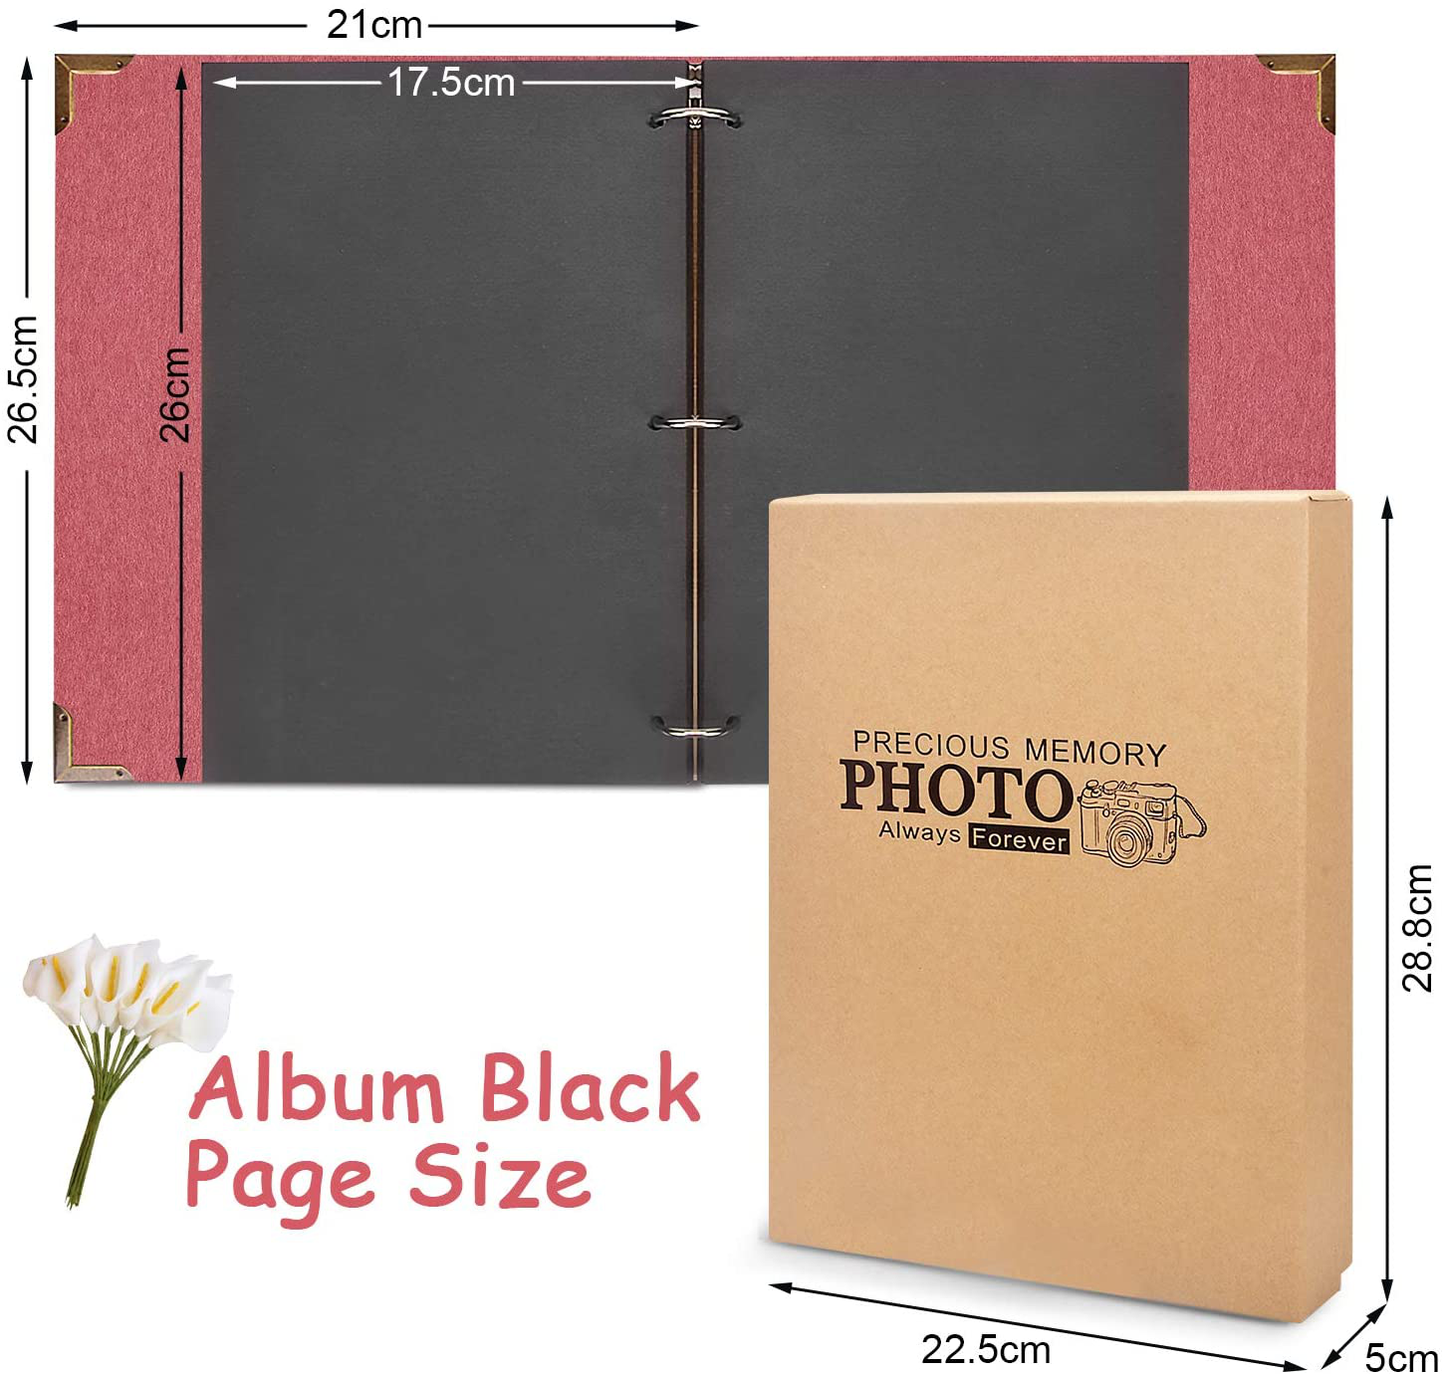 DIY Scrapbook Photo Album 8.5 X 11 Inch, Adkwse Hardcover 80 Pages Black Scrapbook Paper with Scrapbooking Kits Suitable for Anniversary, Travelling, Family, Graduation Gift